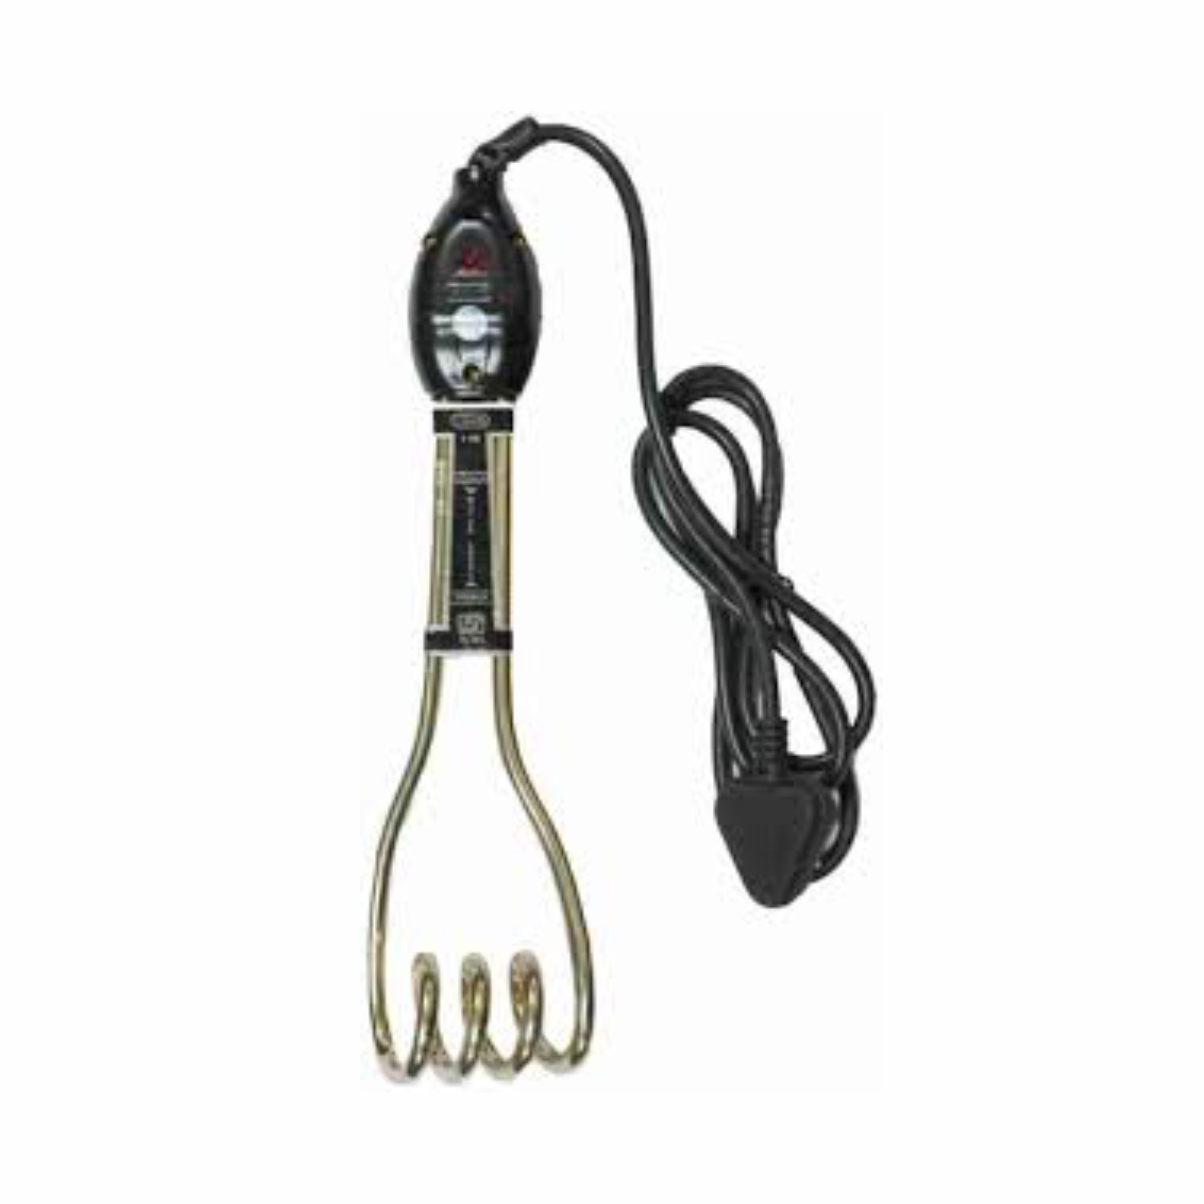 ELECTRIC IMMERSION WATER HEATER VIH - 101 V-Guard 